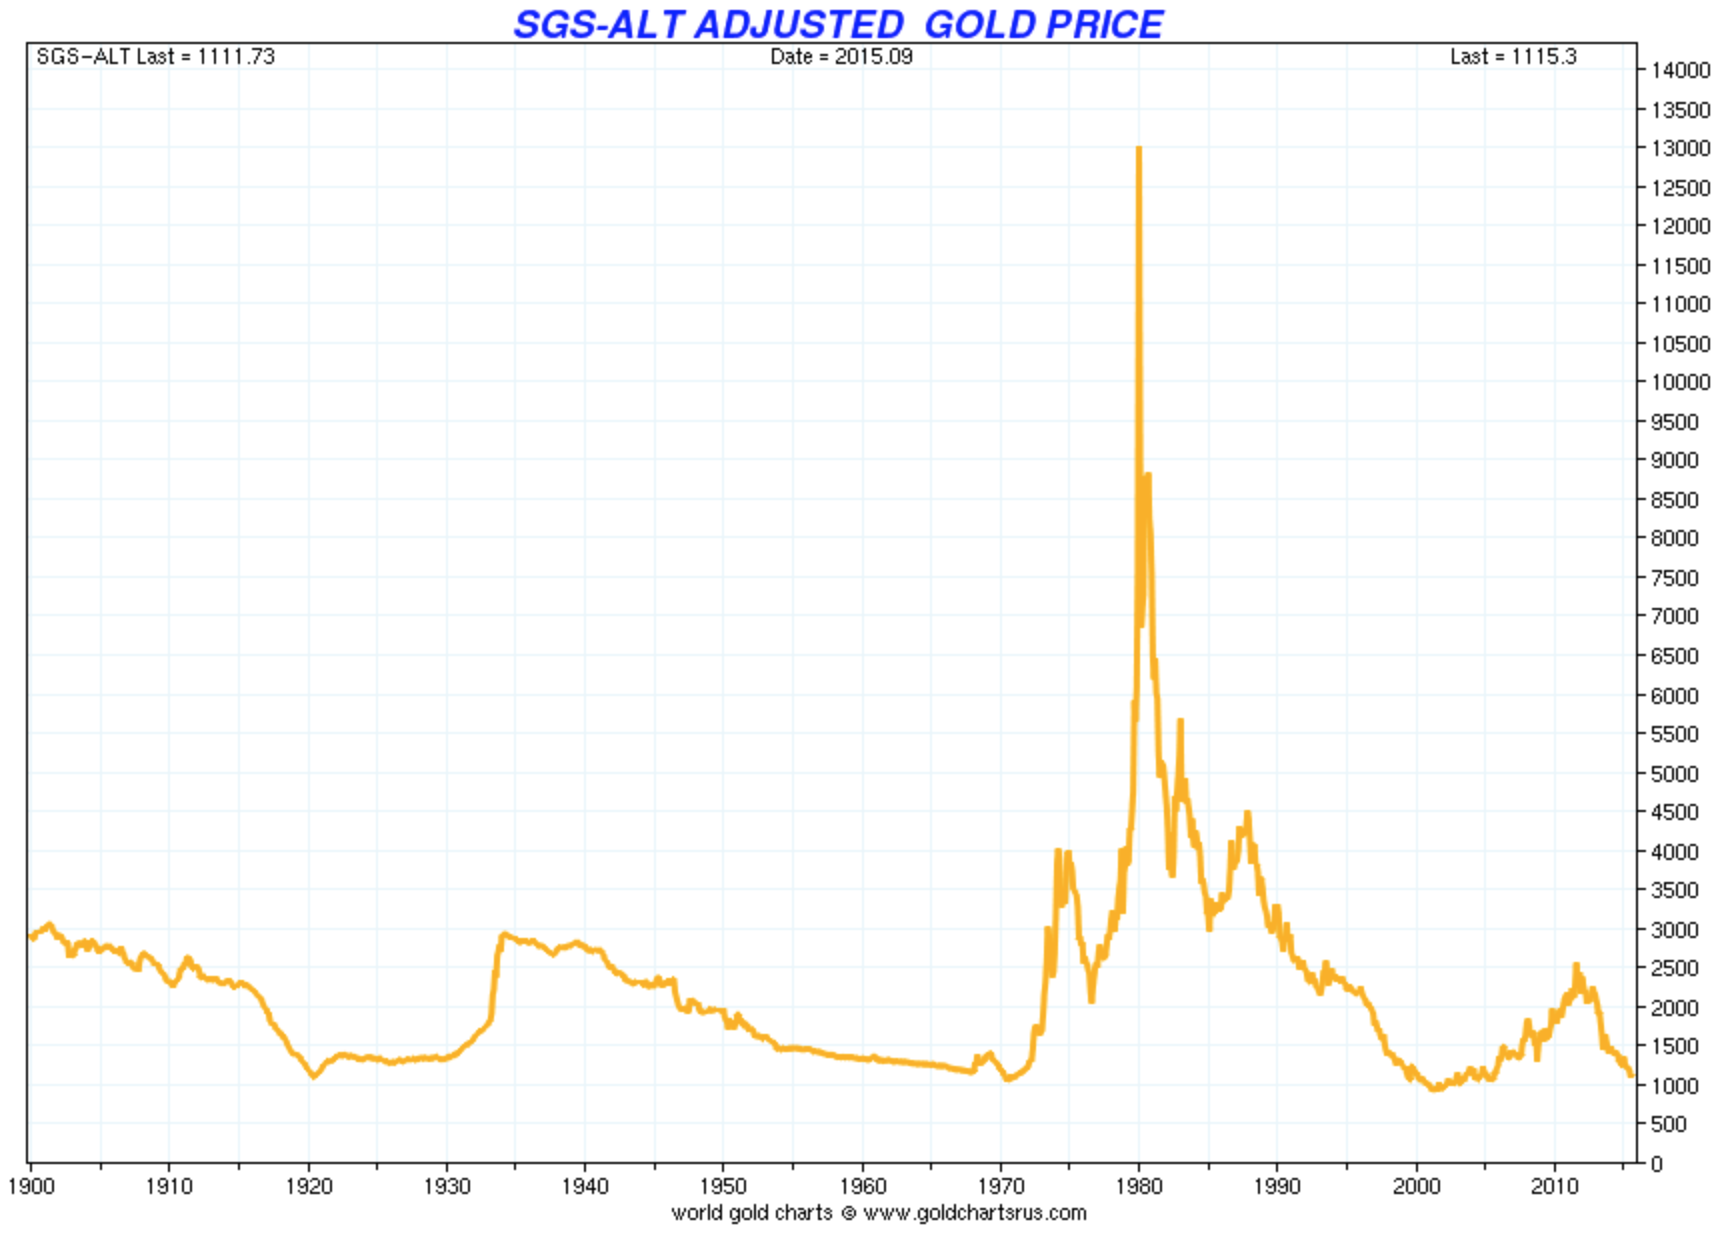 Gold price adjusted by official inflation using old formula